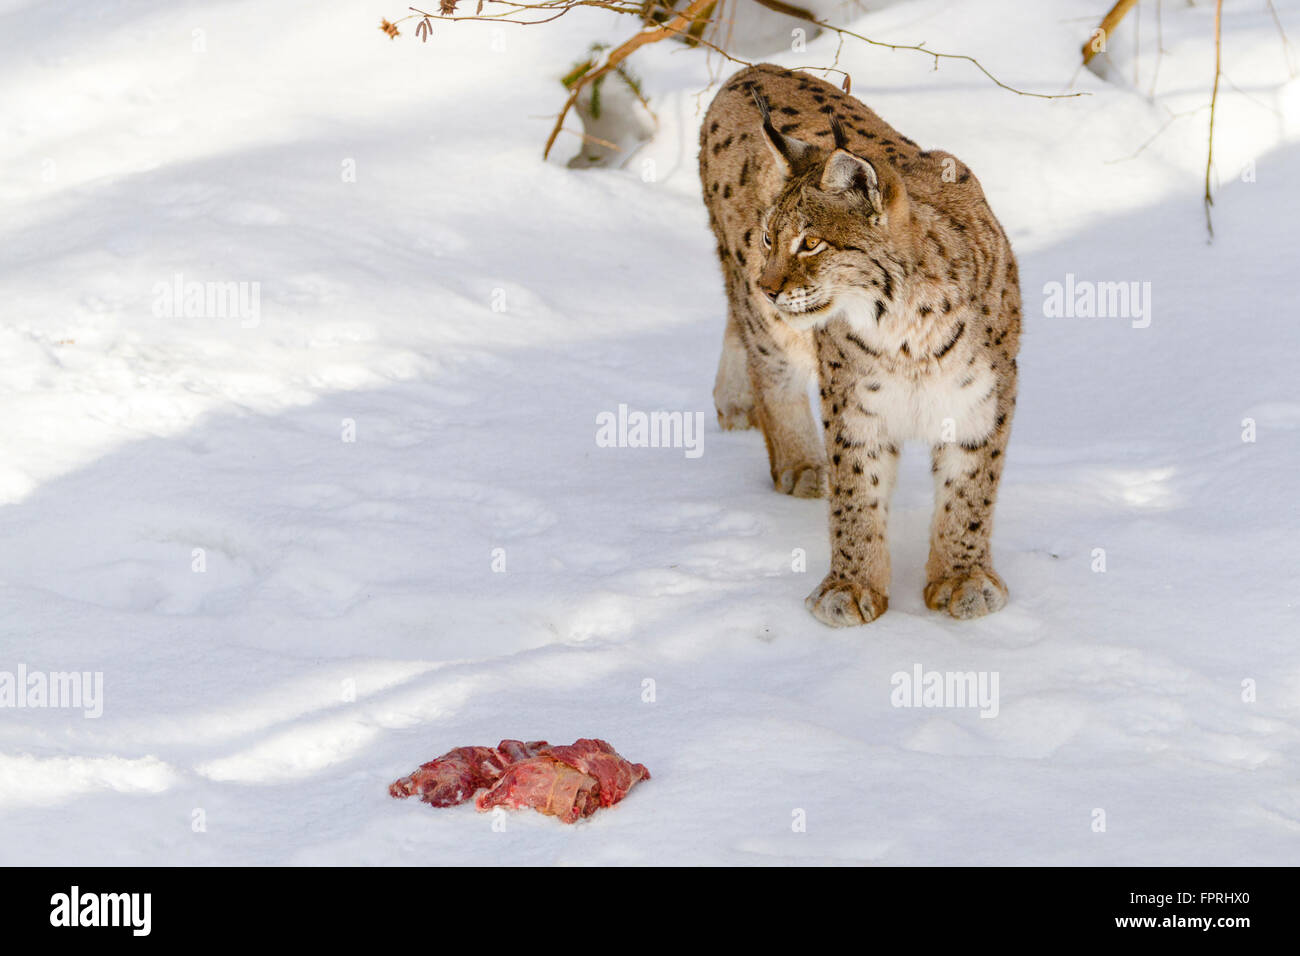 Eurasian lynx (Lynx lynx) standing in front of the meat in the snow in winter, bavarian forest Germany Stock Photo